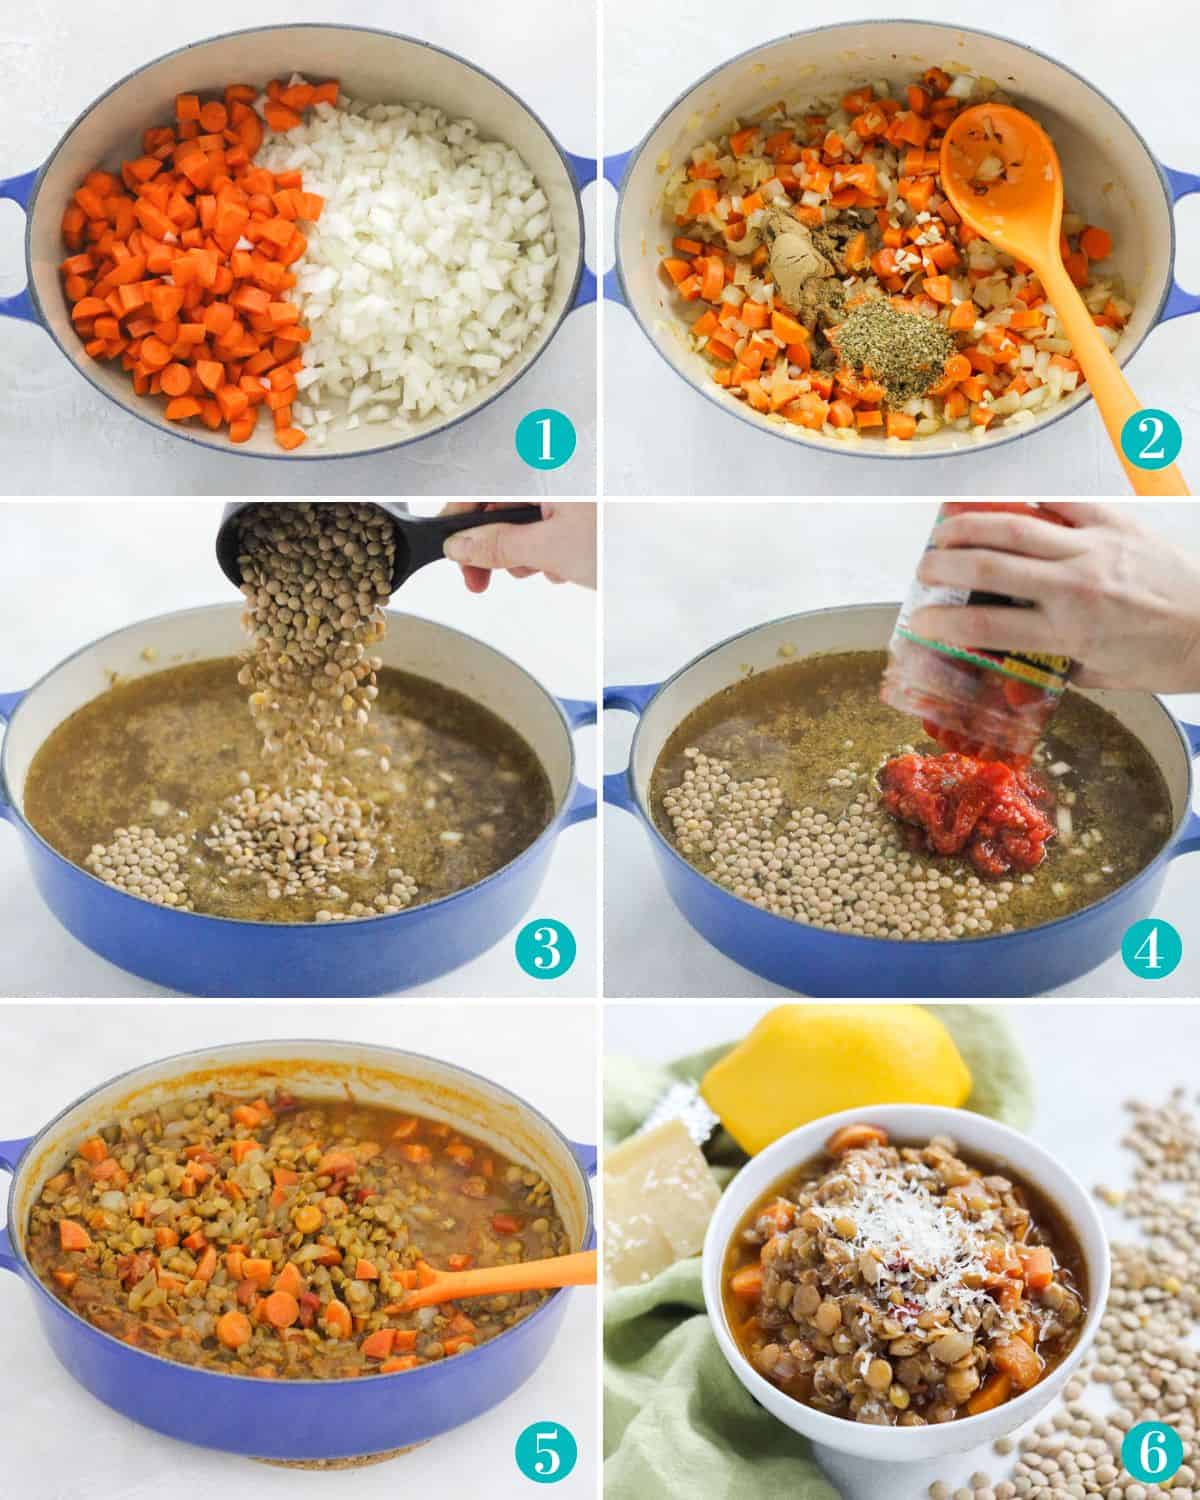 six photo collage with veggies sauteing in a blue pot, spices added to sauteed veggies, hand pouring lentils into pot from a black measuring cup, hand pouring a jar of salsa into the pot, cooked soup in blue pot, and a bowl of soup topped with cheese.